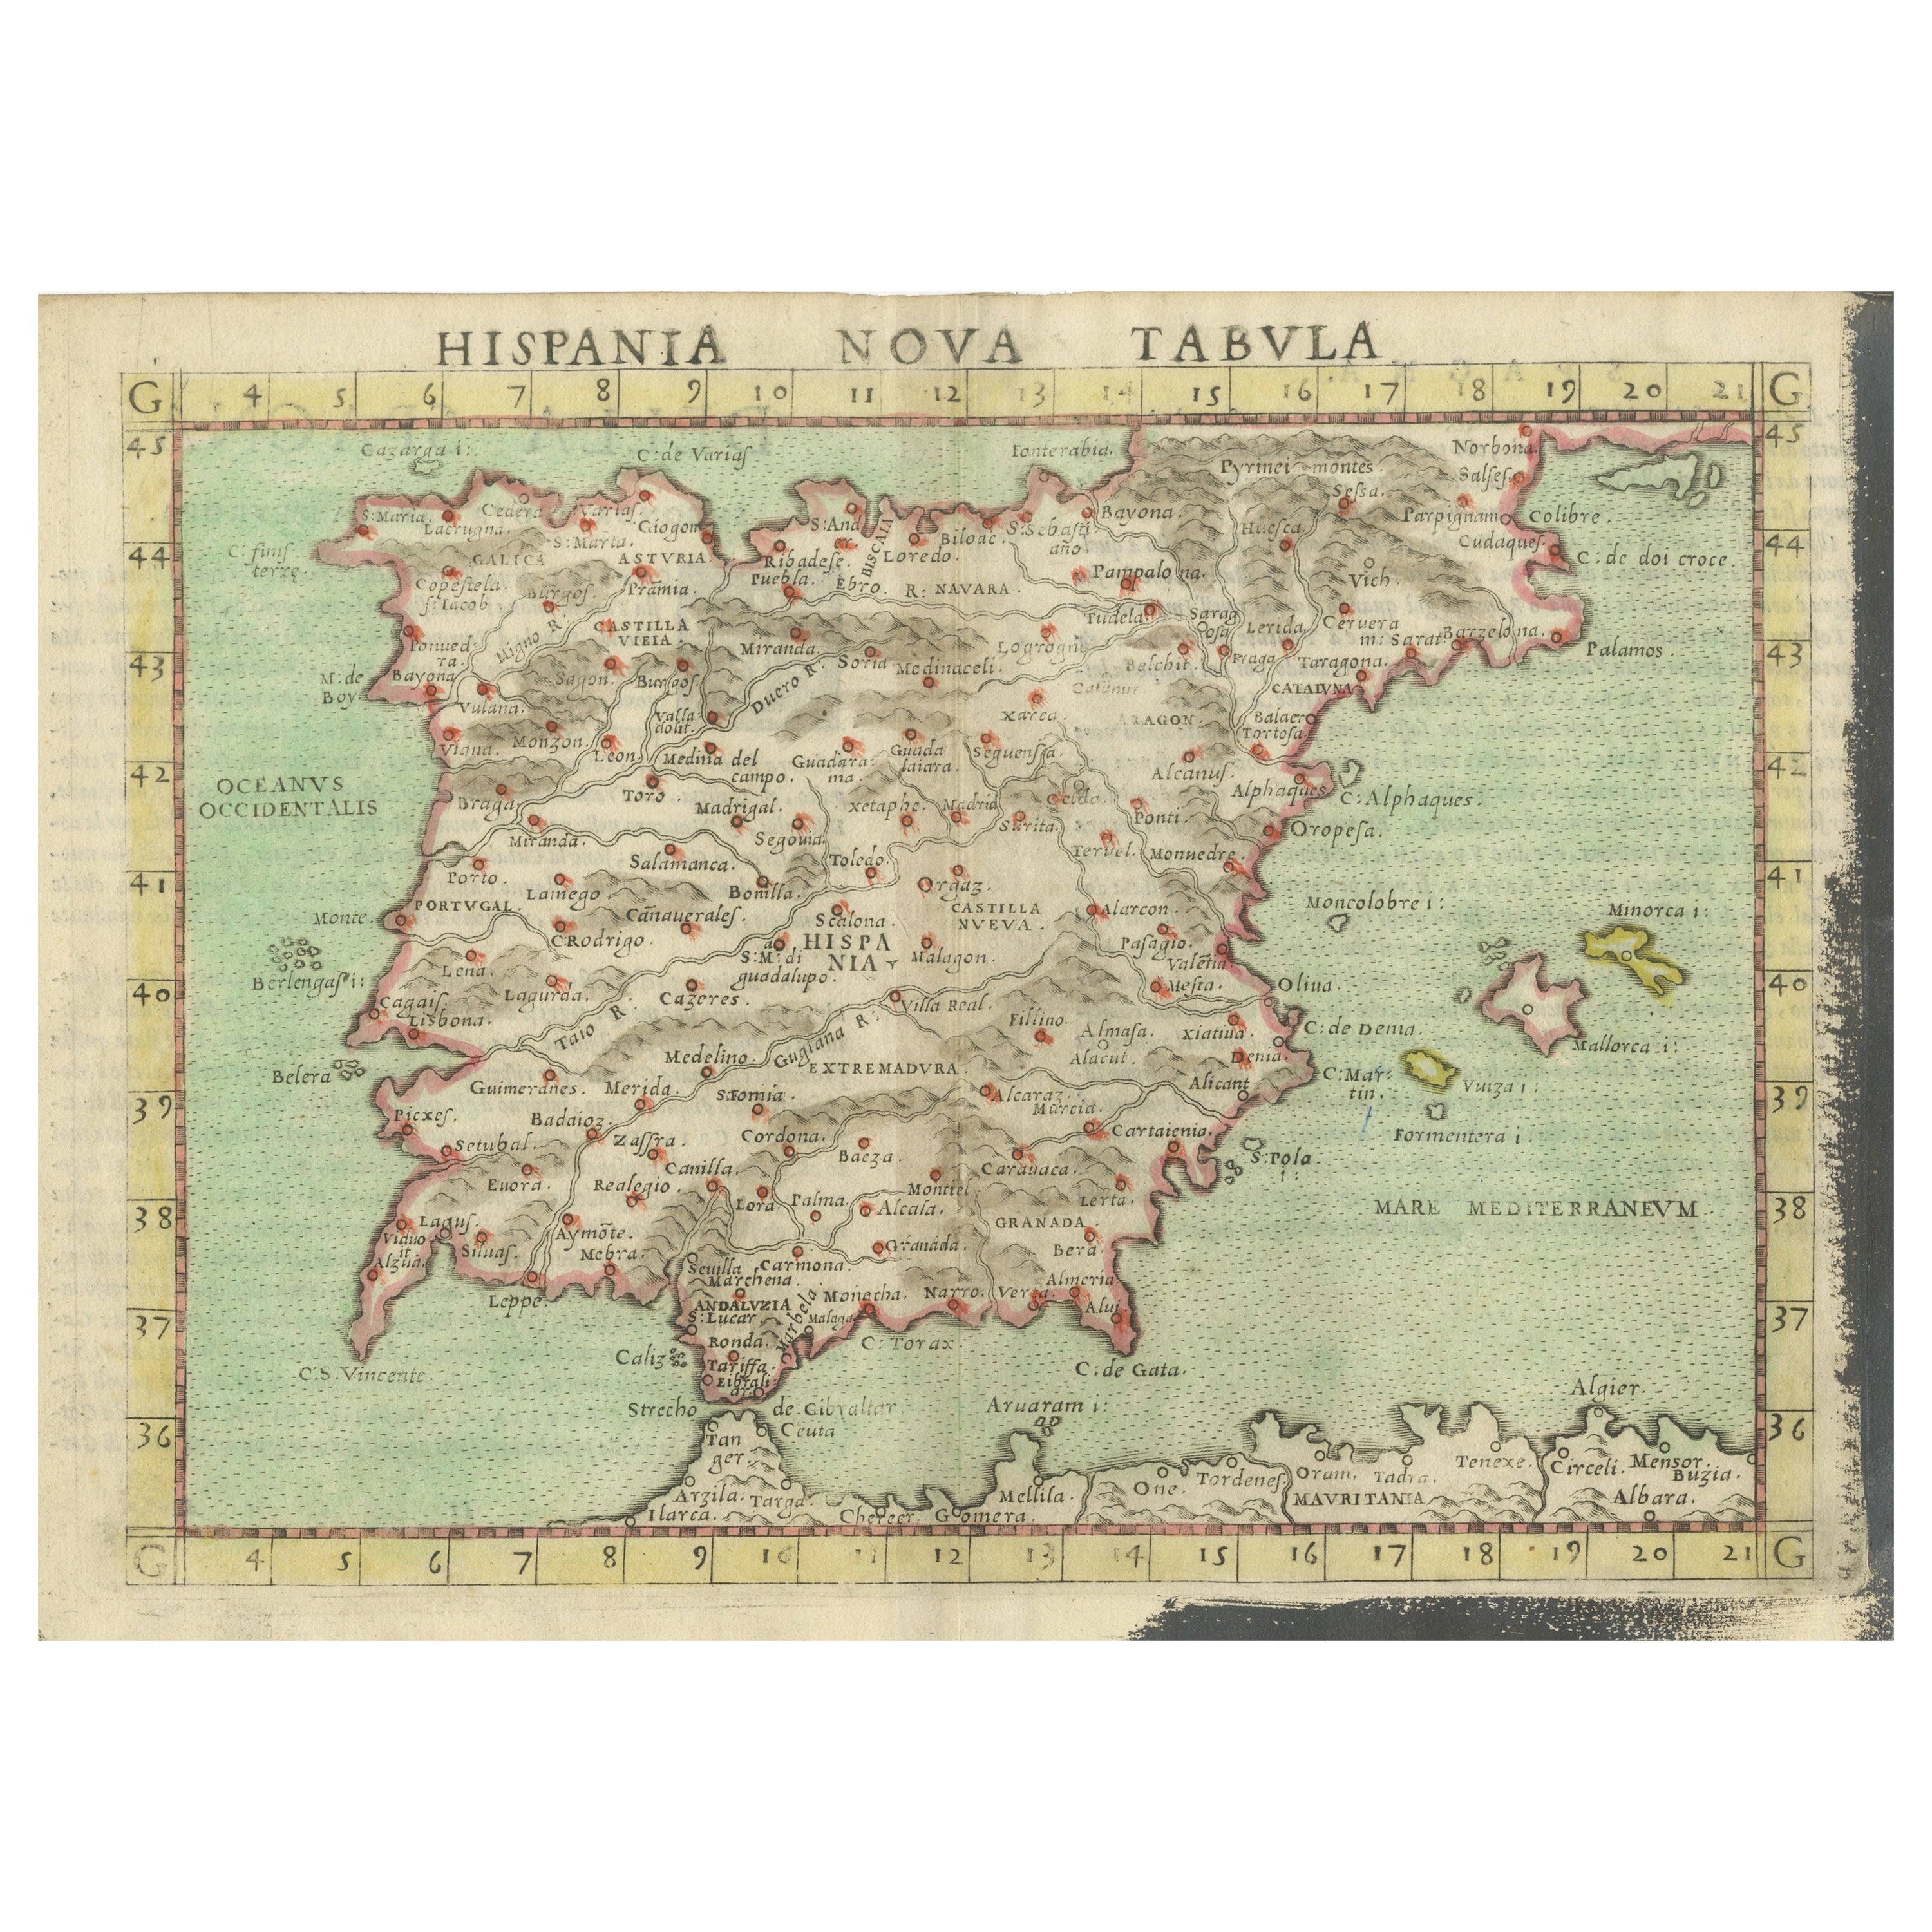 Antique Map of Spain including the Balearic Islands